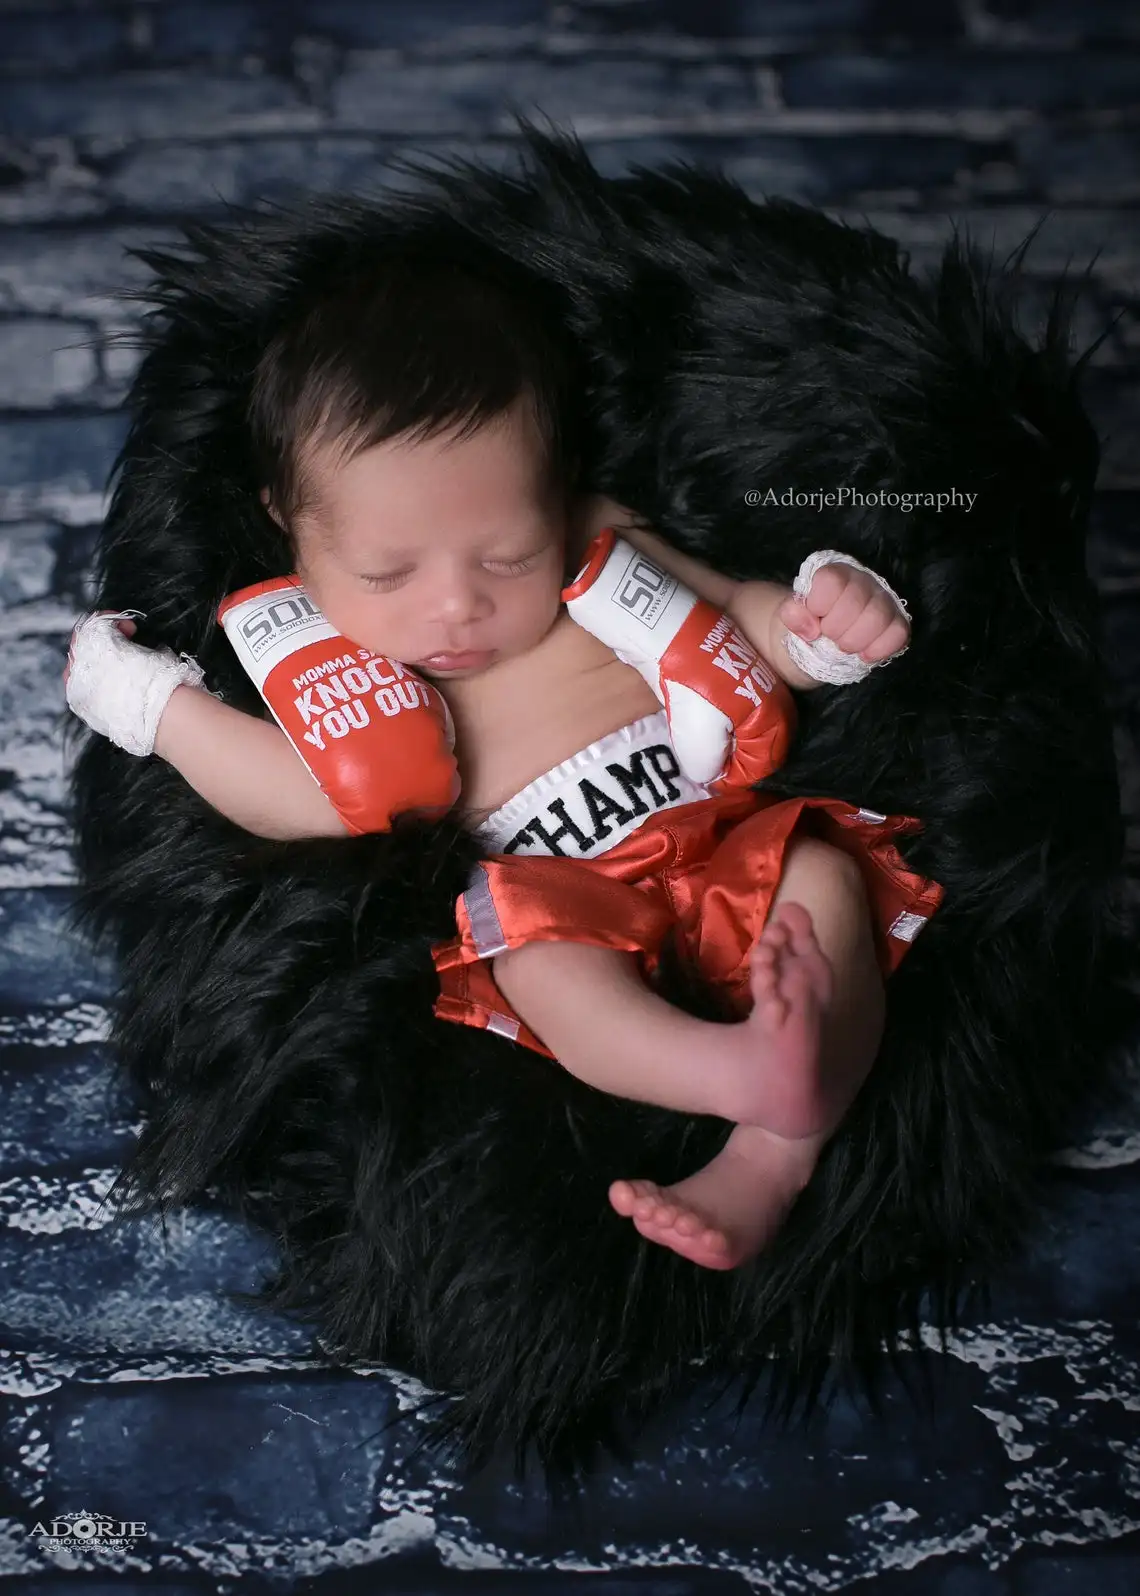 Newborn Photography Props Mini  Simulation Boxing Glove Boxing Flag Gloves for Baby Photo Prop Decorated Accessories